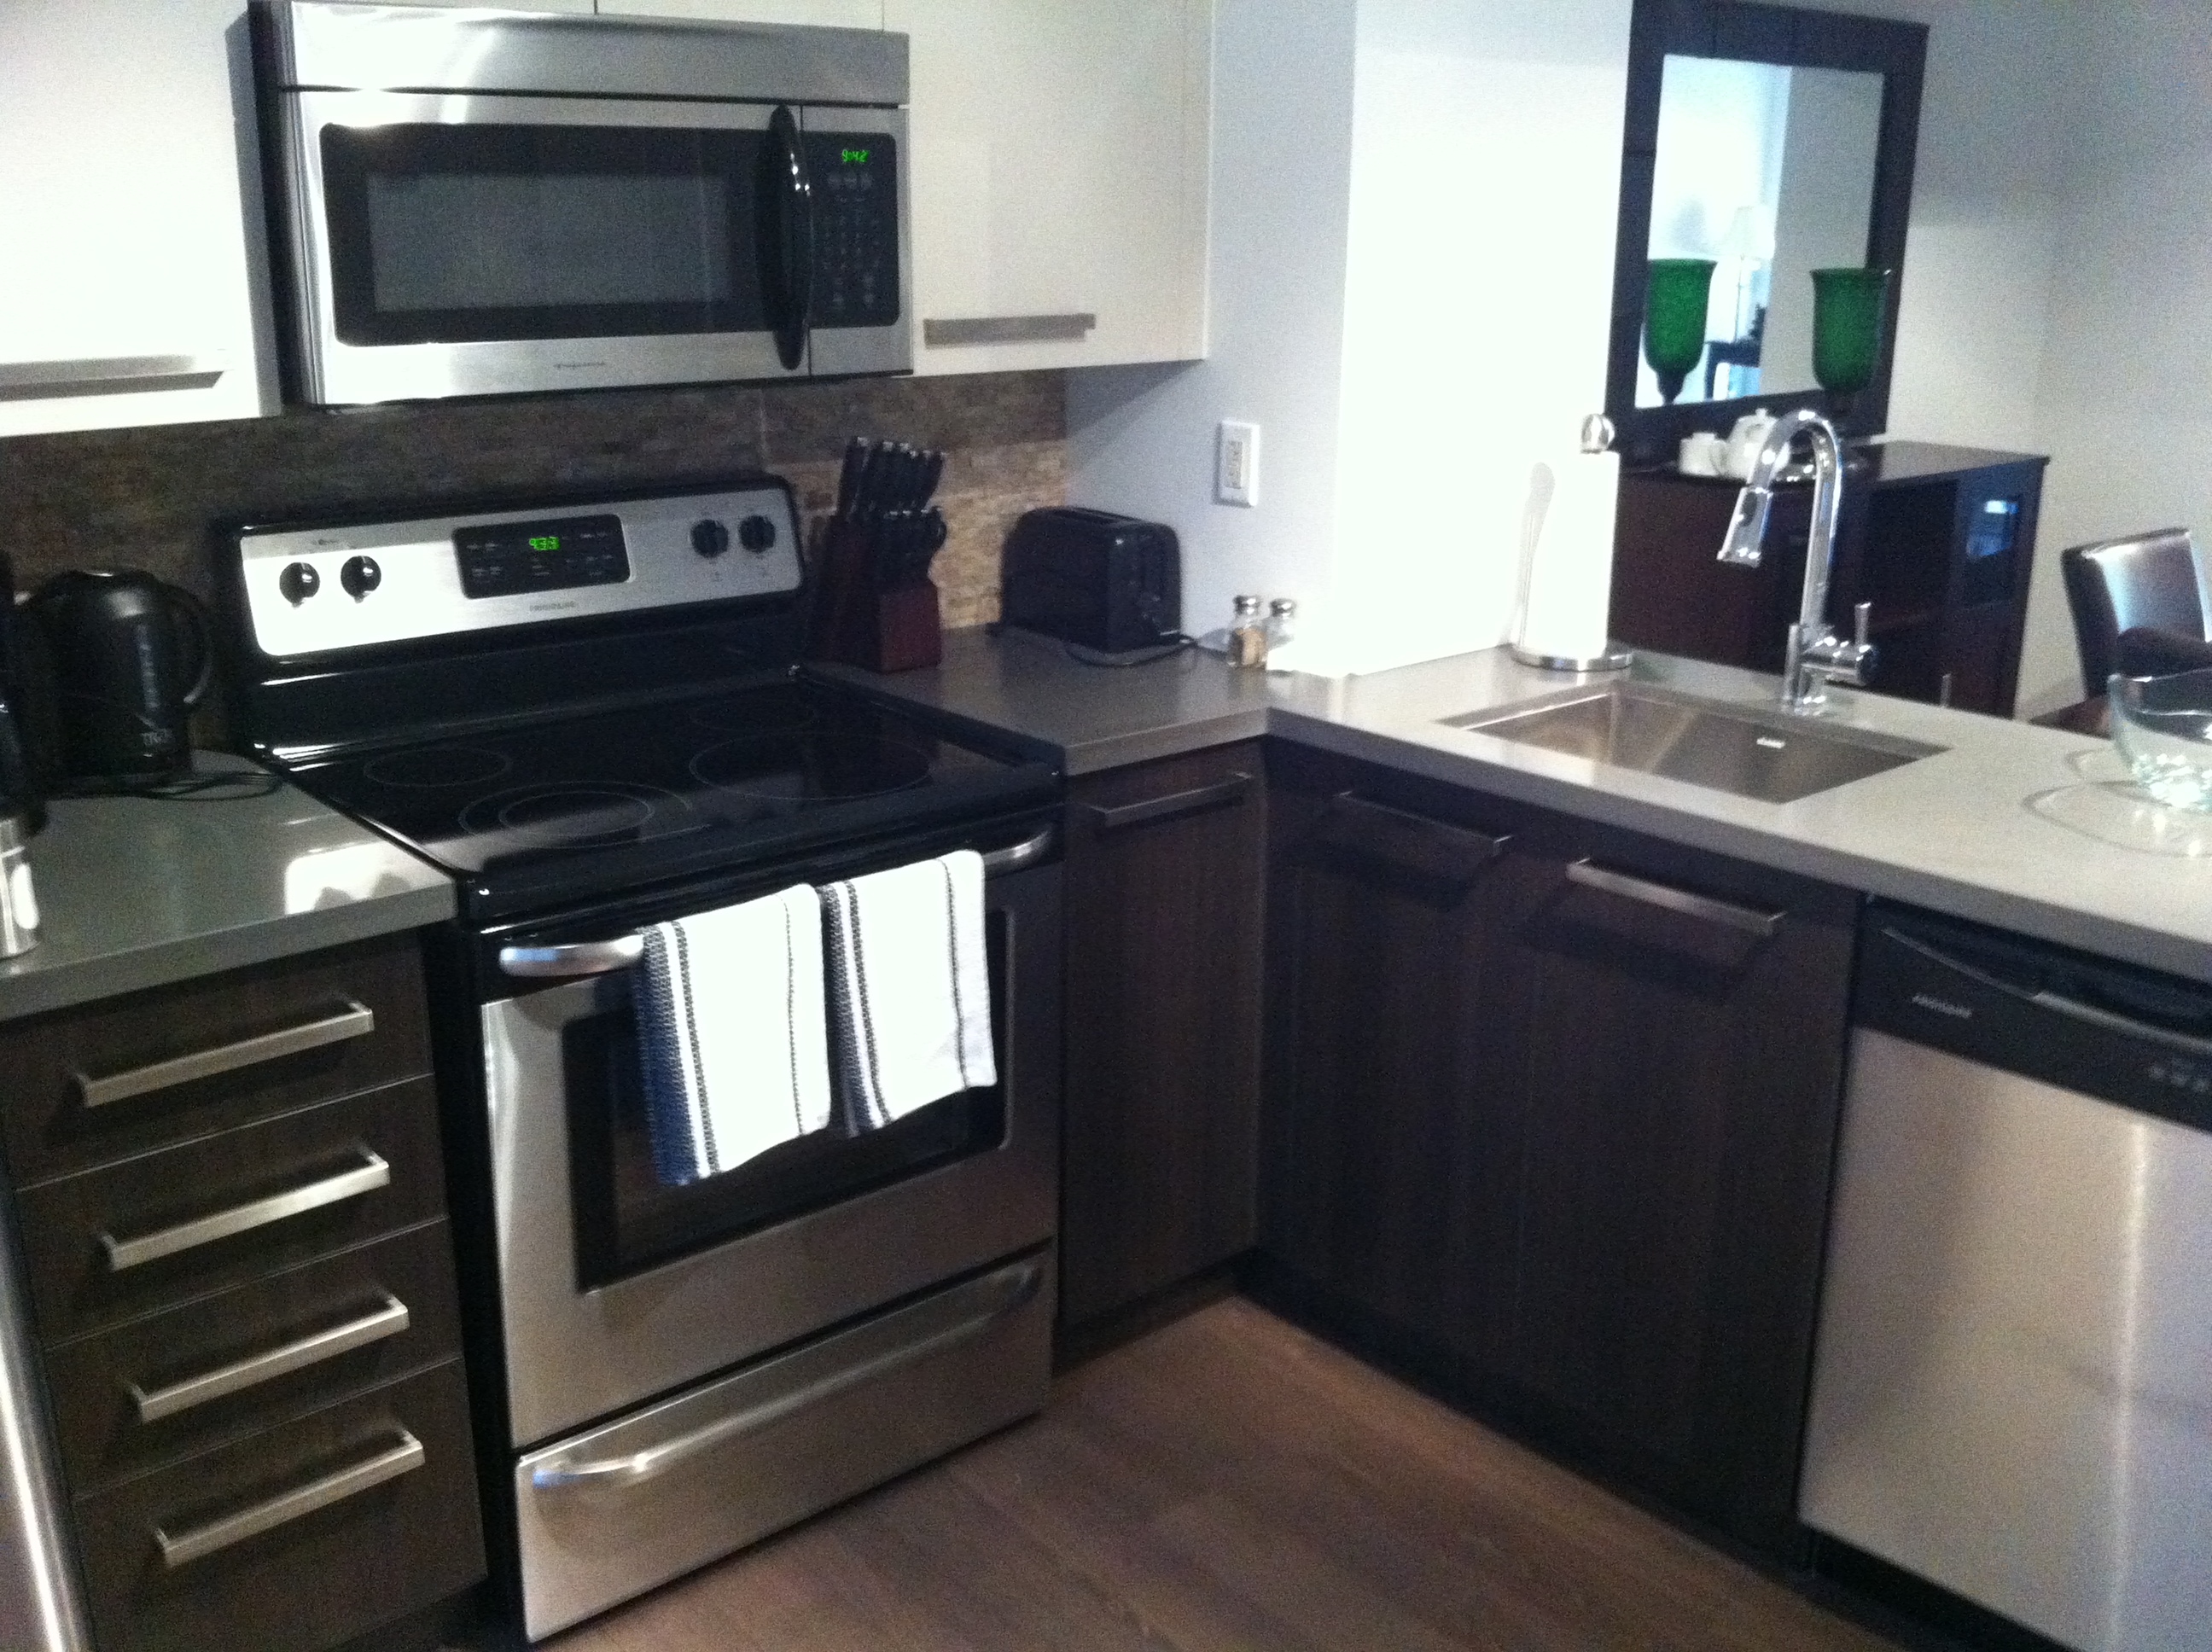 New Kitchens in all suites